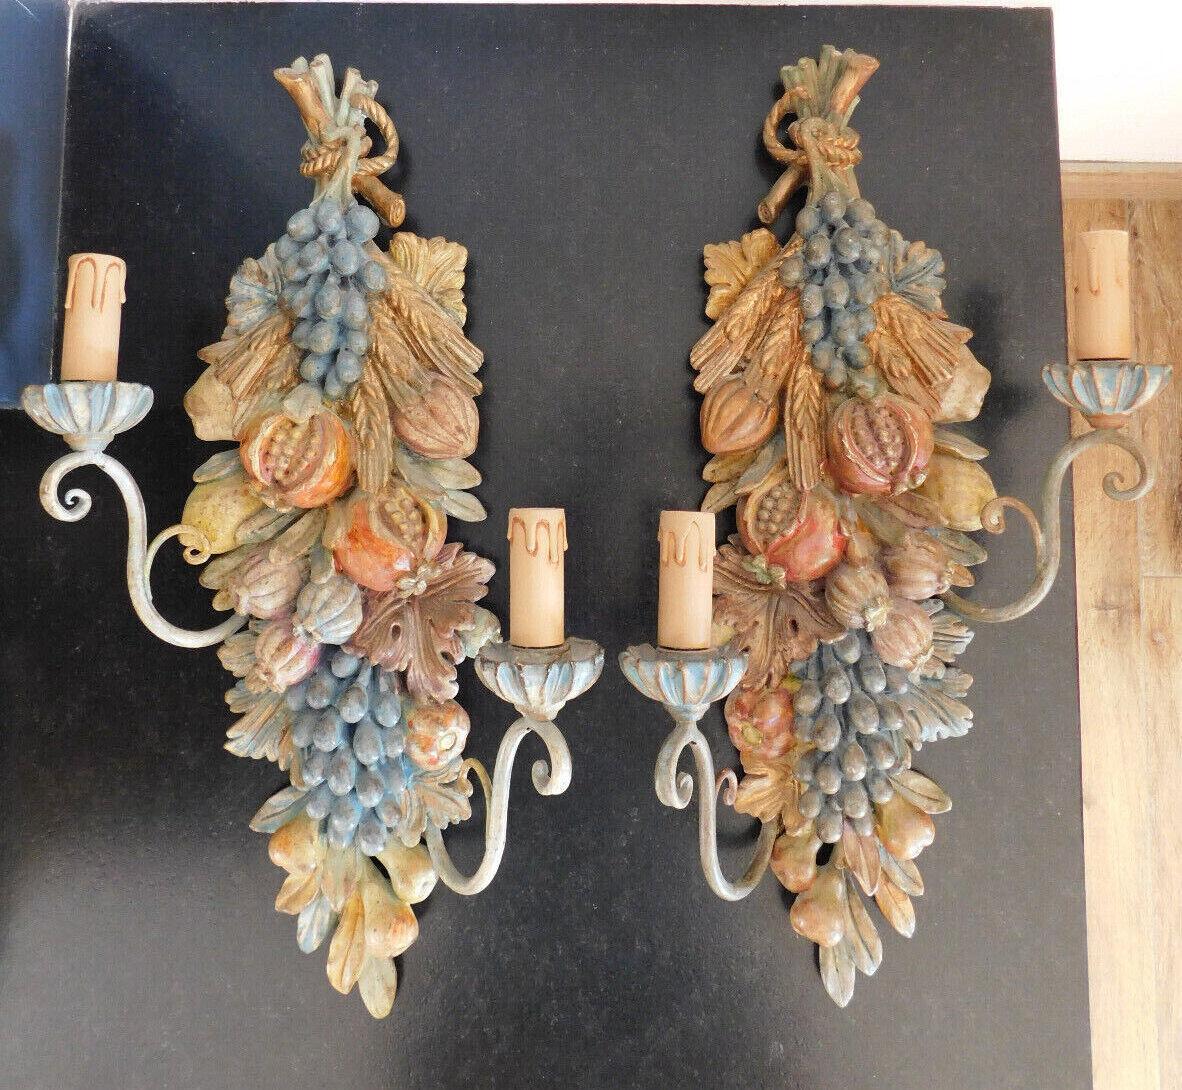 Pair Large Art Nouveau Expertly Carved and Patinated Wood Wall Sconces. Polychrome tones, fruit, flowers. French Estate sale acquisition.